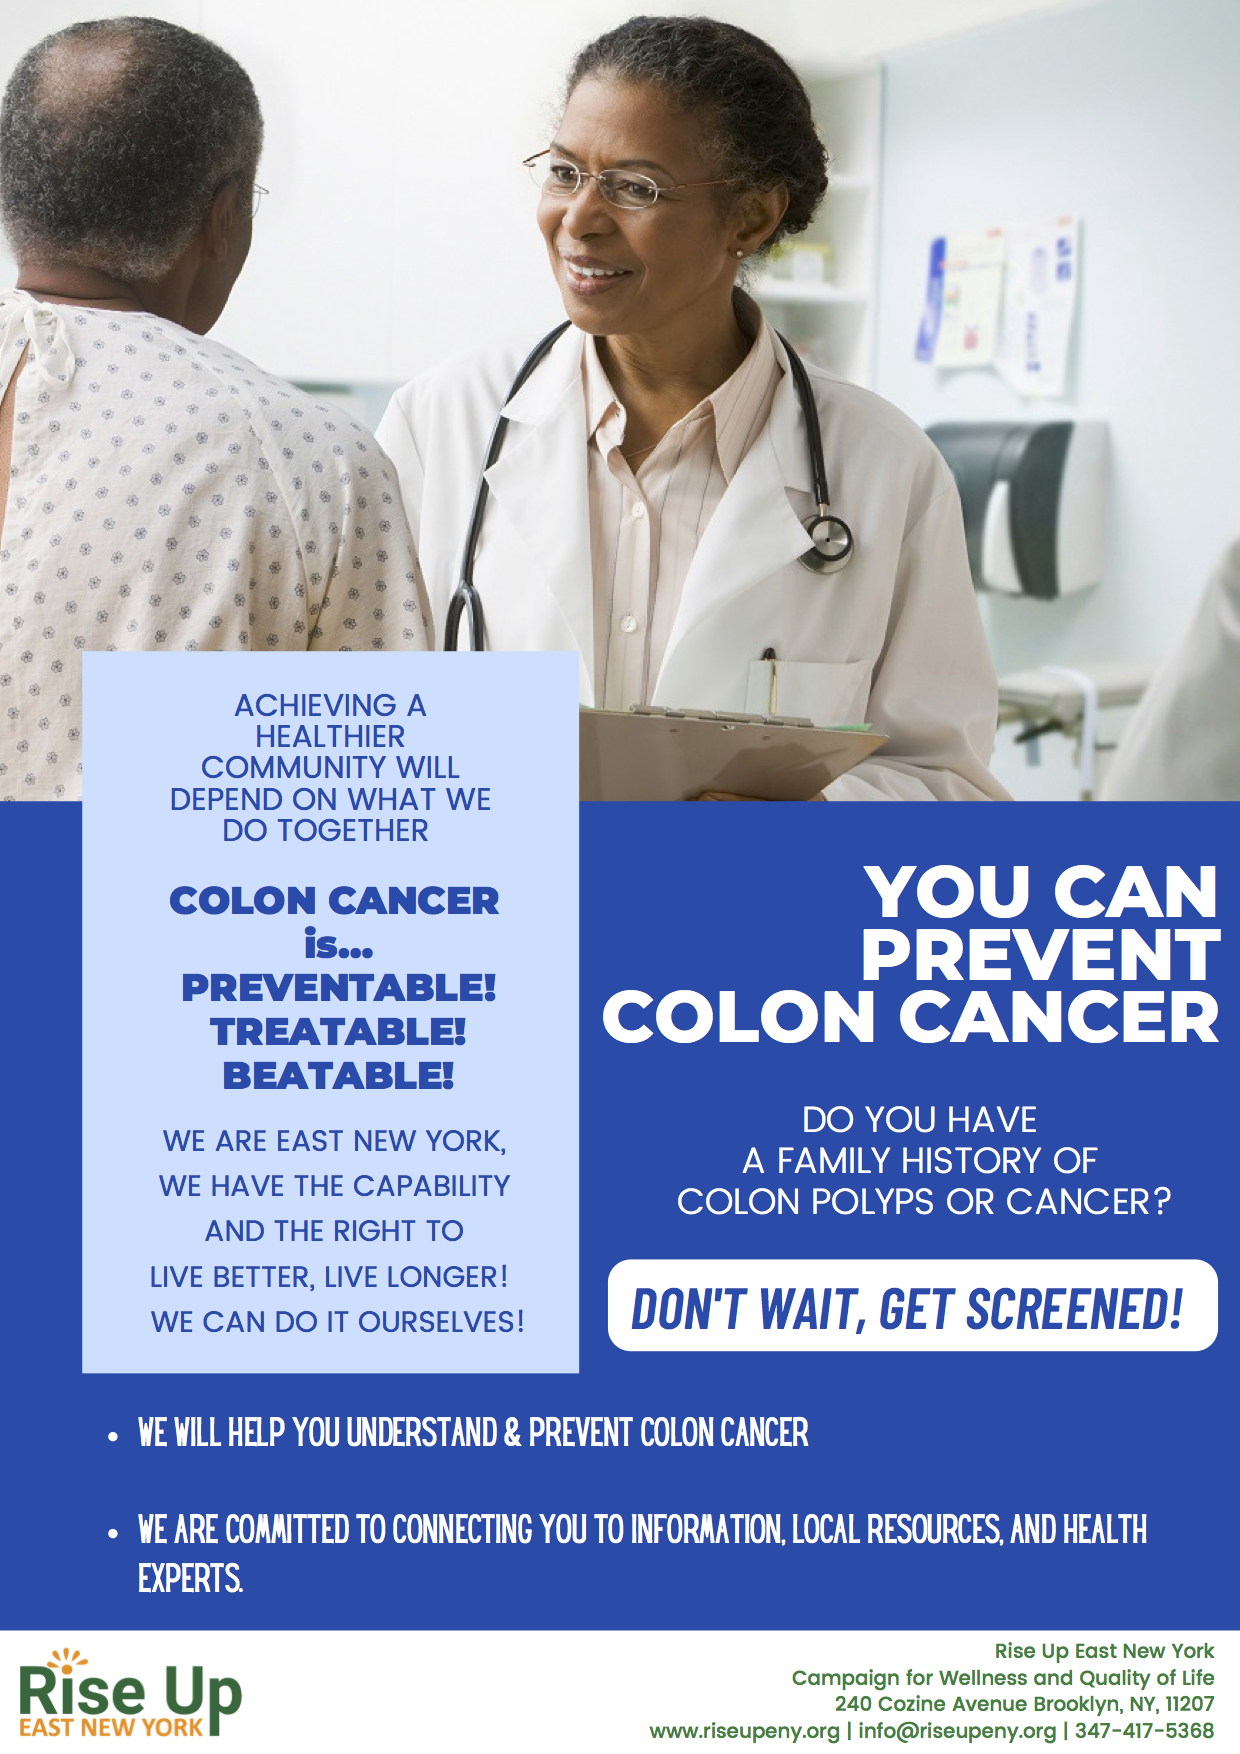 March is National Colorectal Cancer Awareness Month!